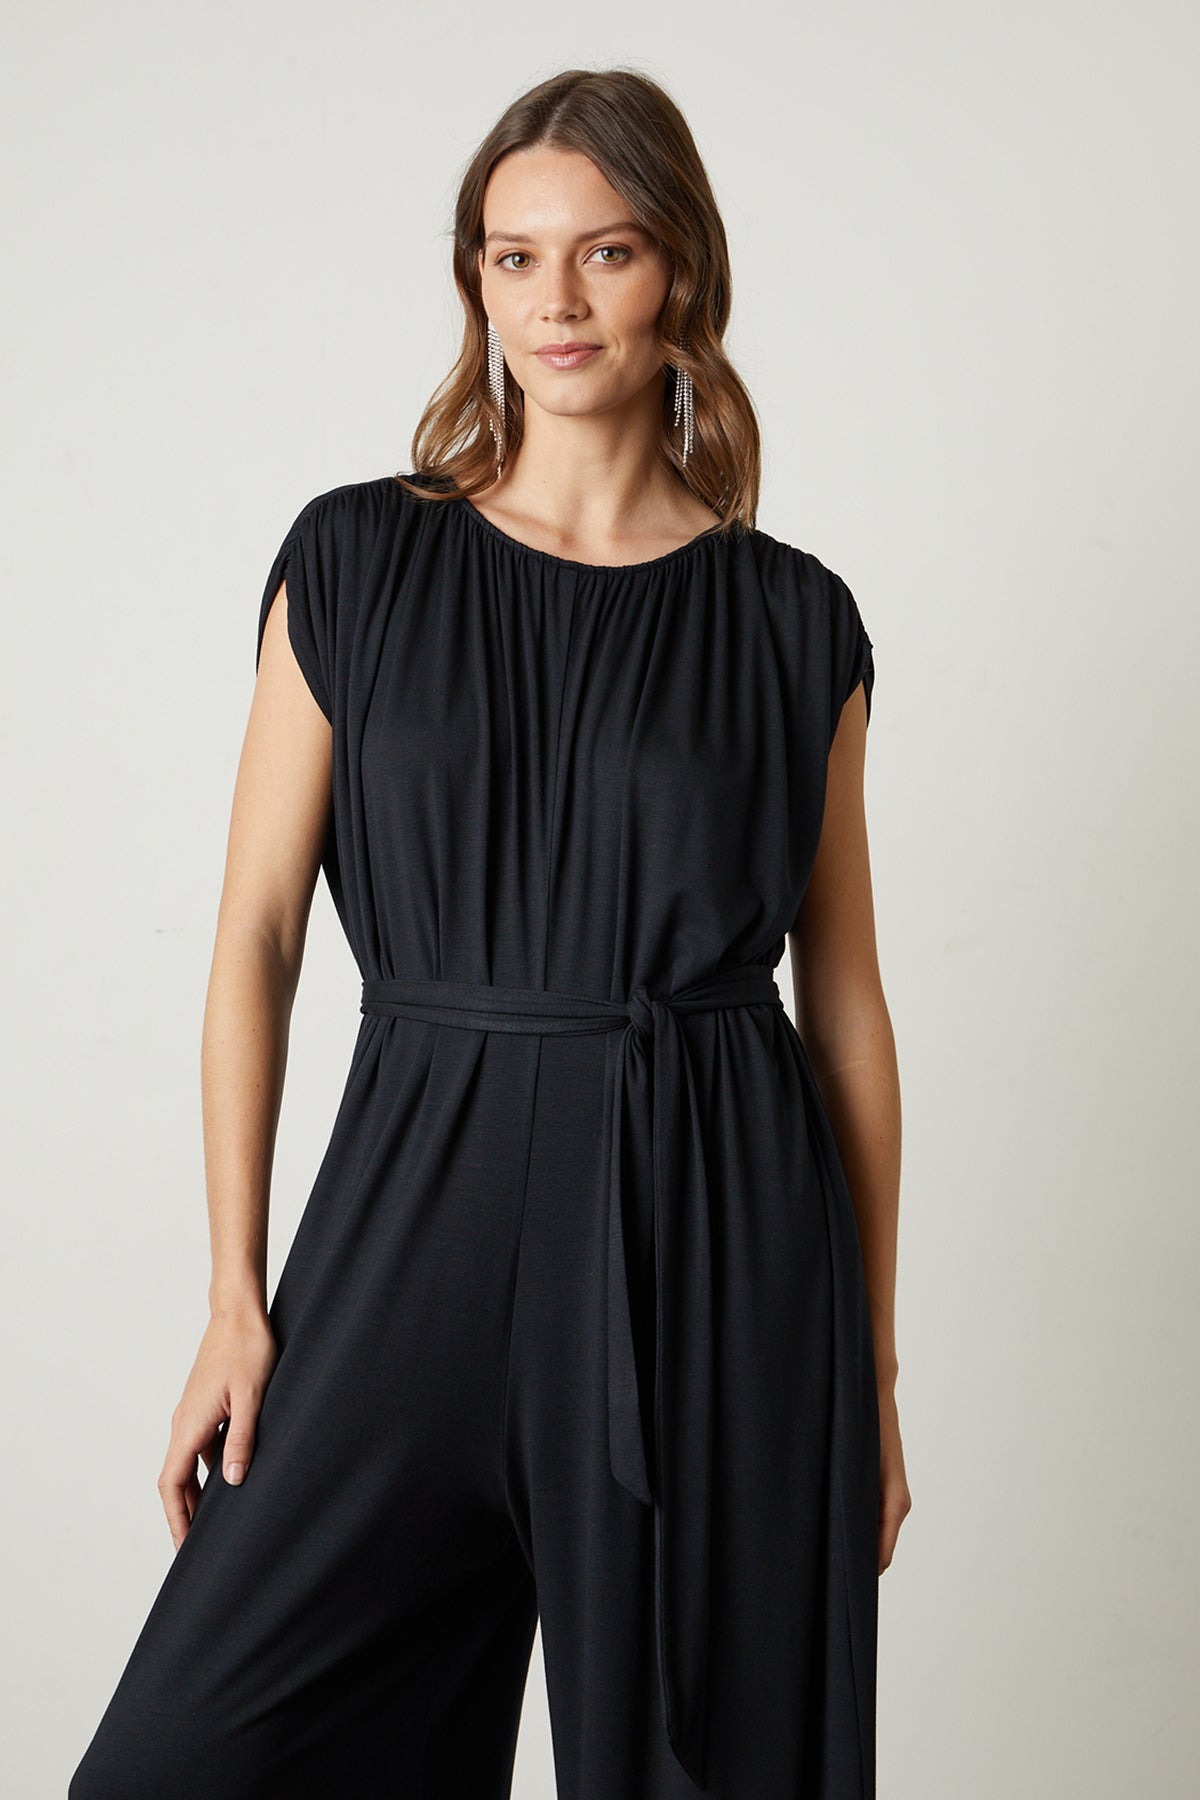 Norah Wide Leg Jumpsuit with tie in black front close up-25444271882433